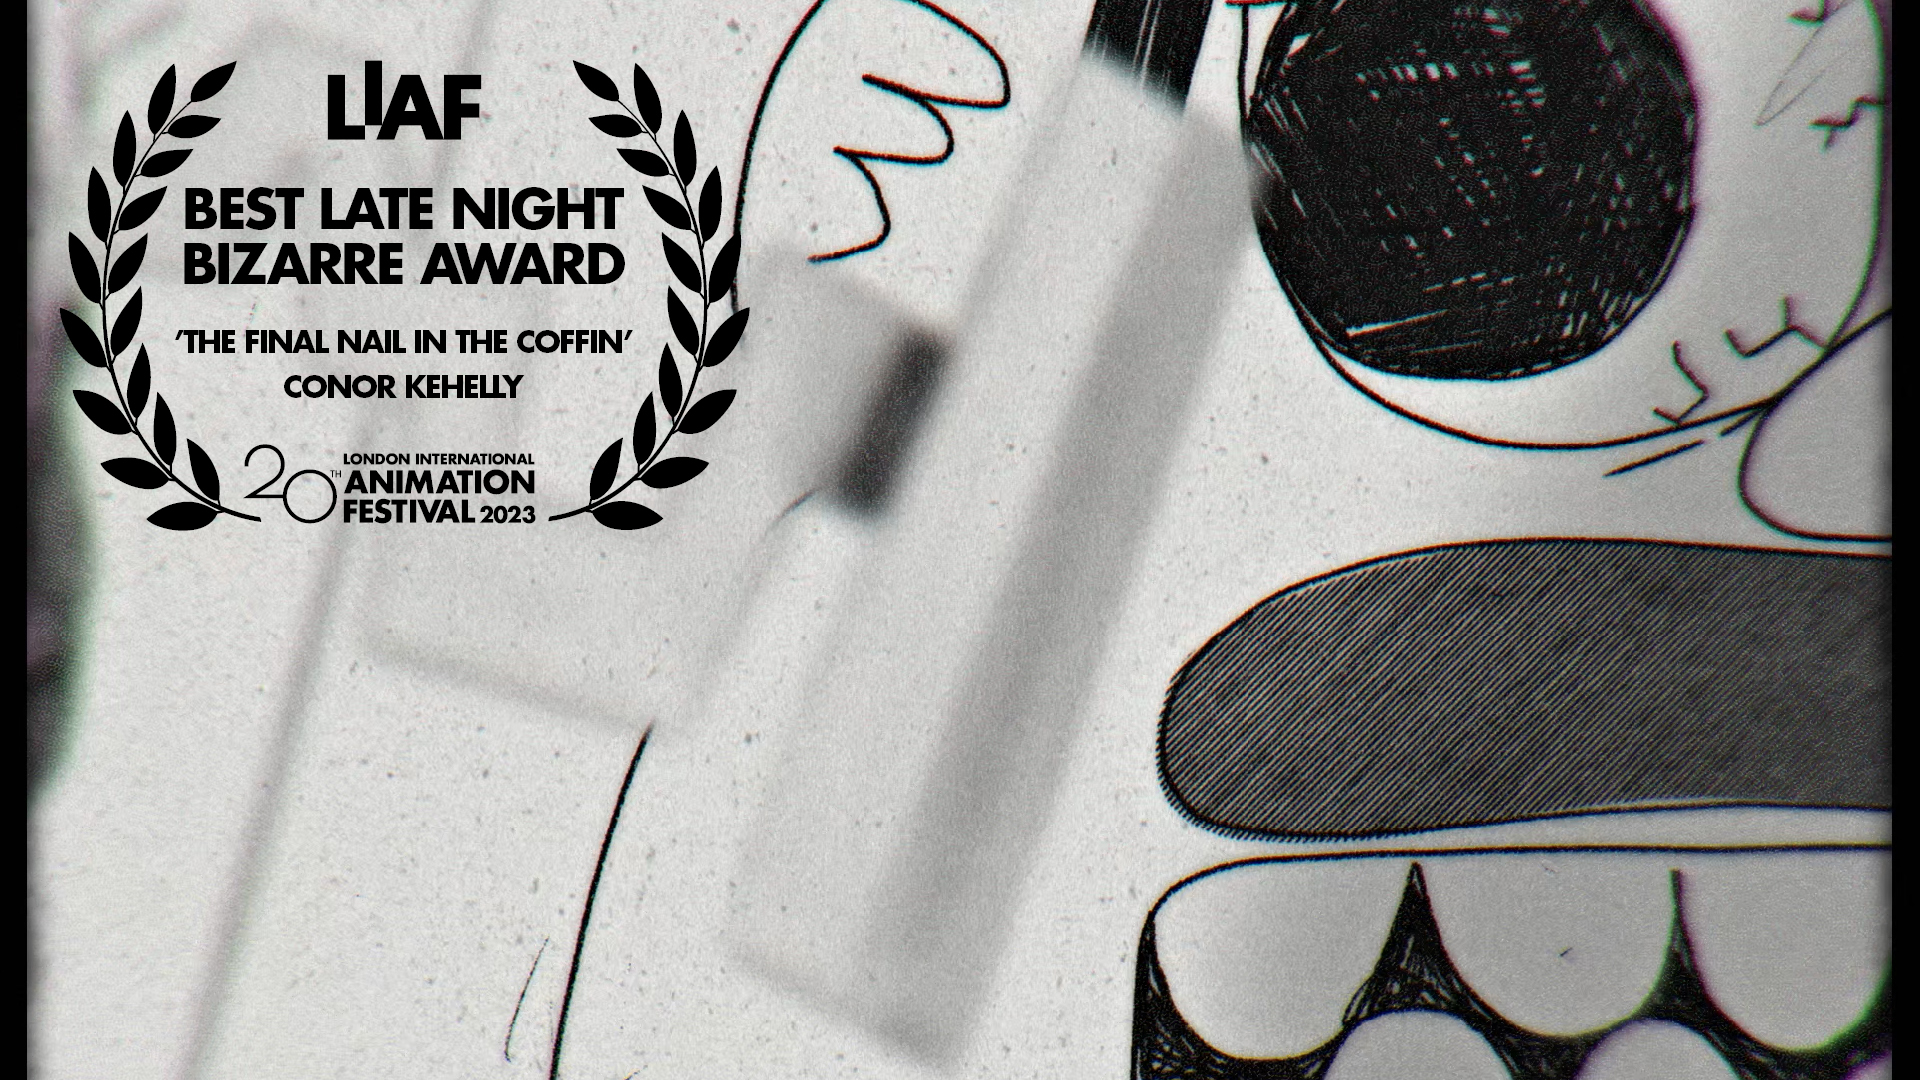 LIAF, London International Animation Festival, Best Late Night Bizarre Award, The Final Nail in the Coffin, Conor Kehelly